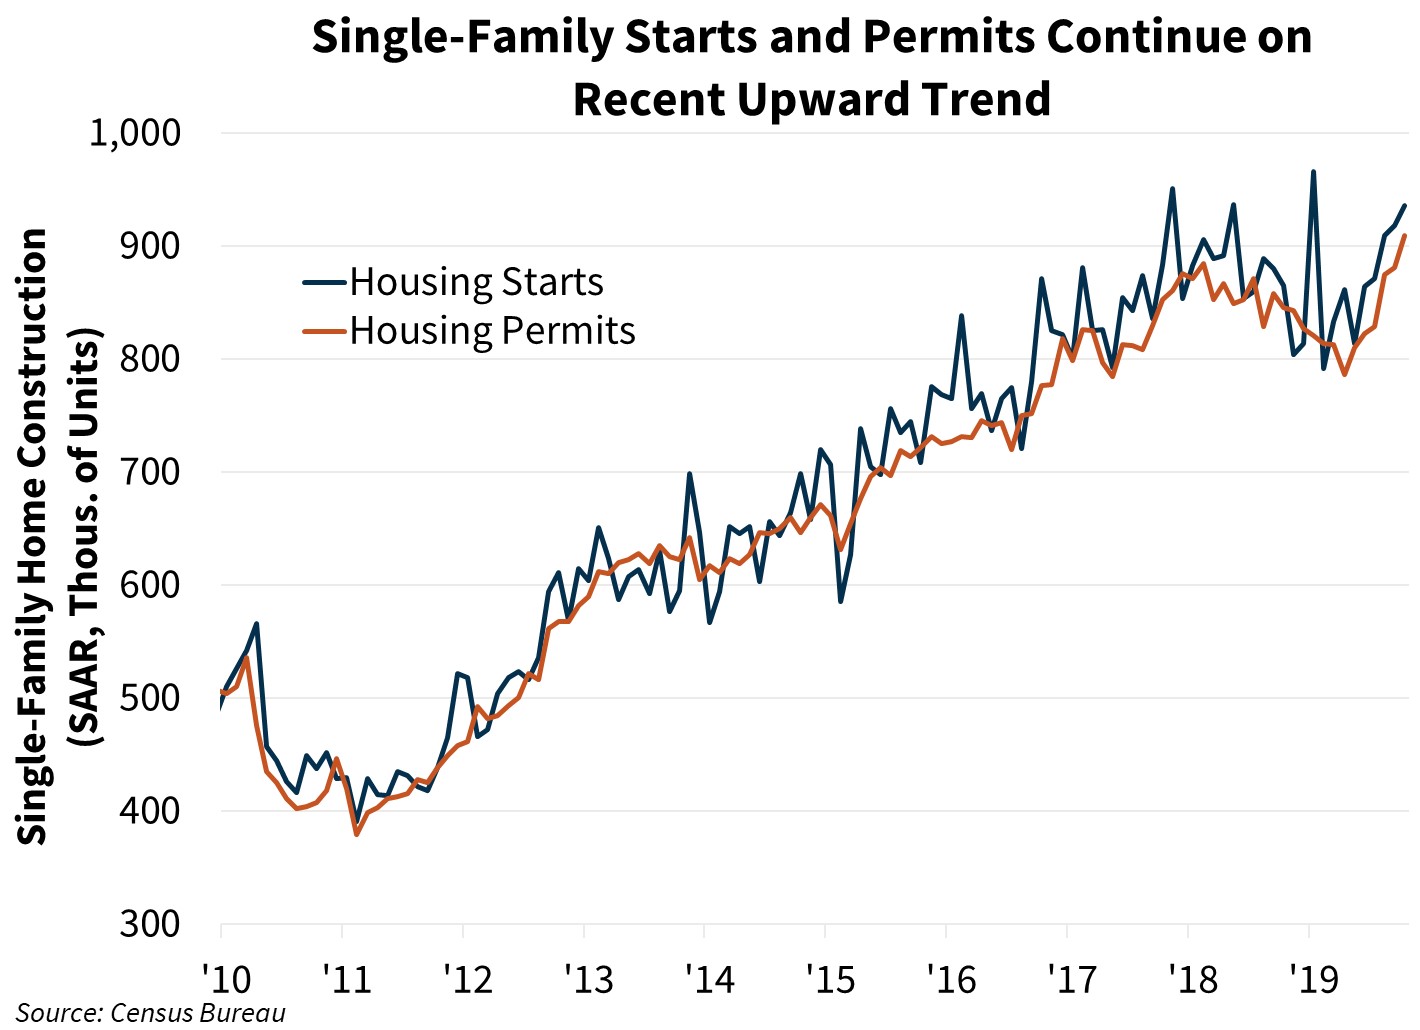 Single-Family Starts and Permits Continue on Recent Upward Trend